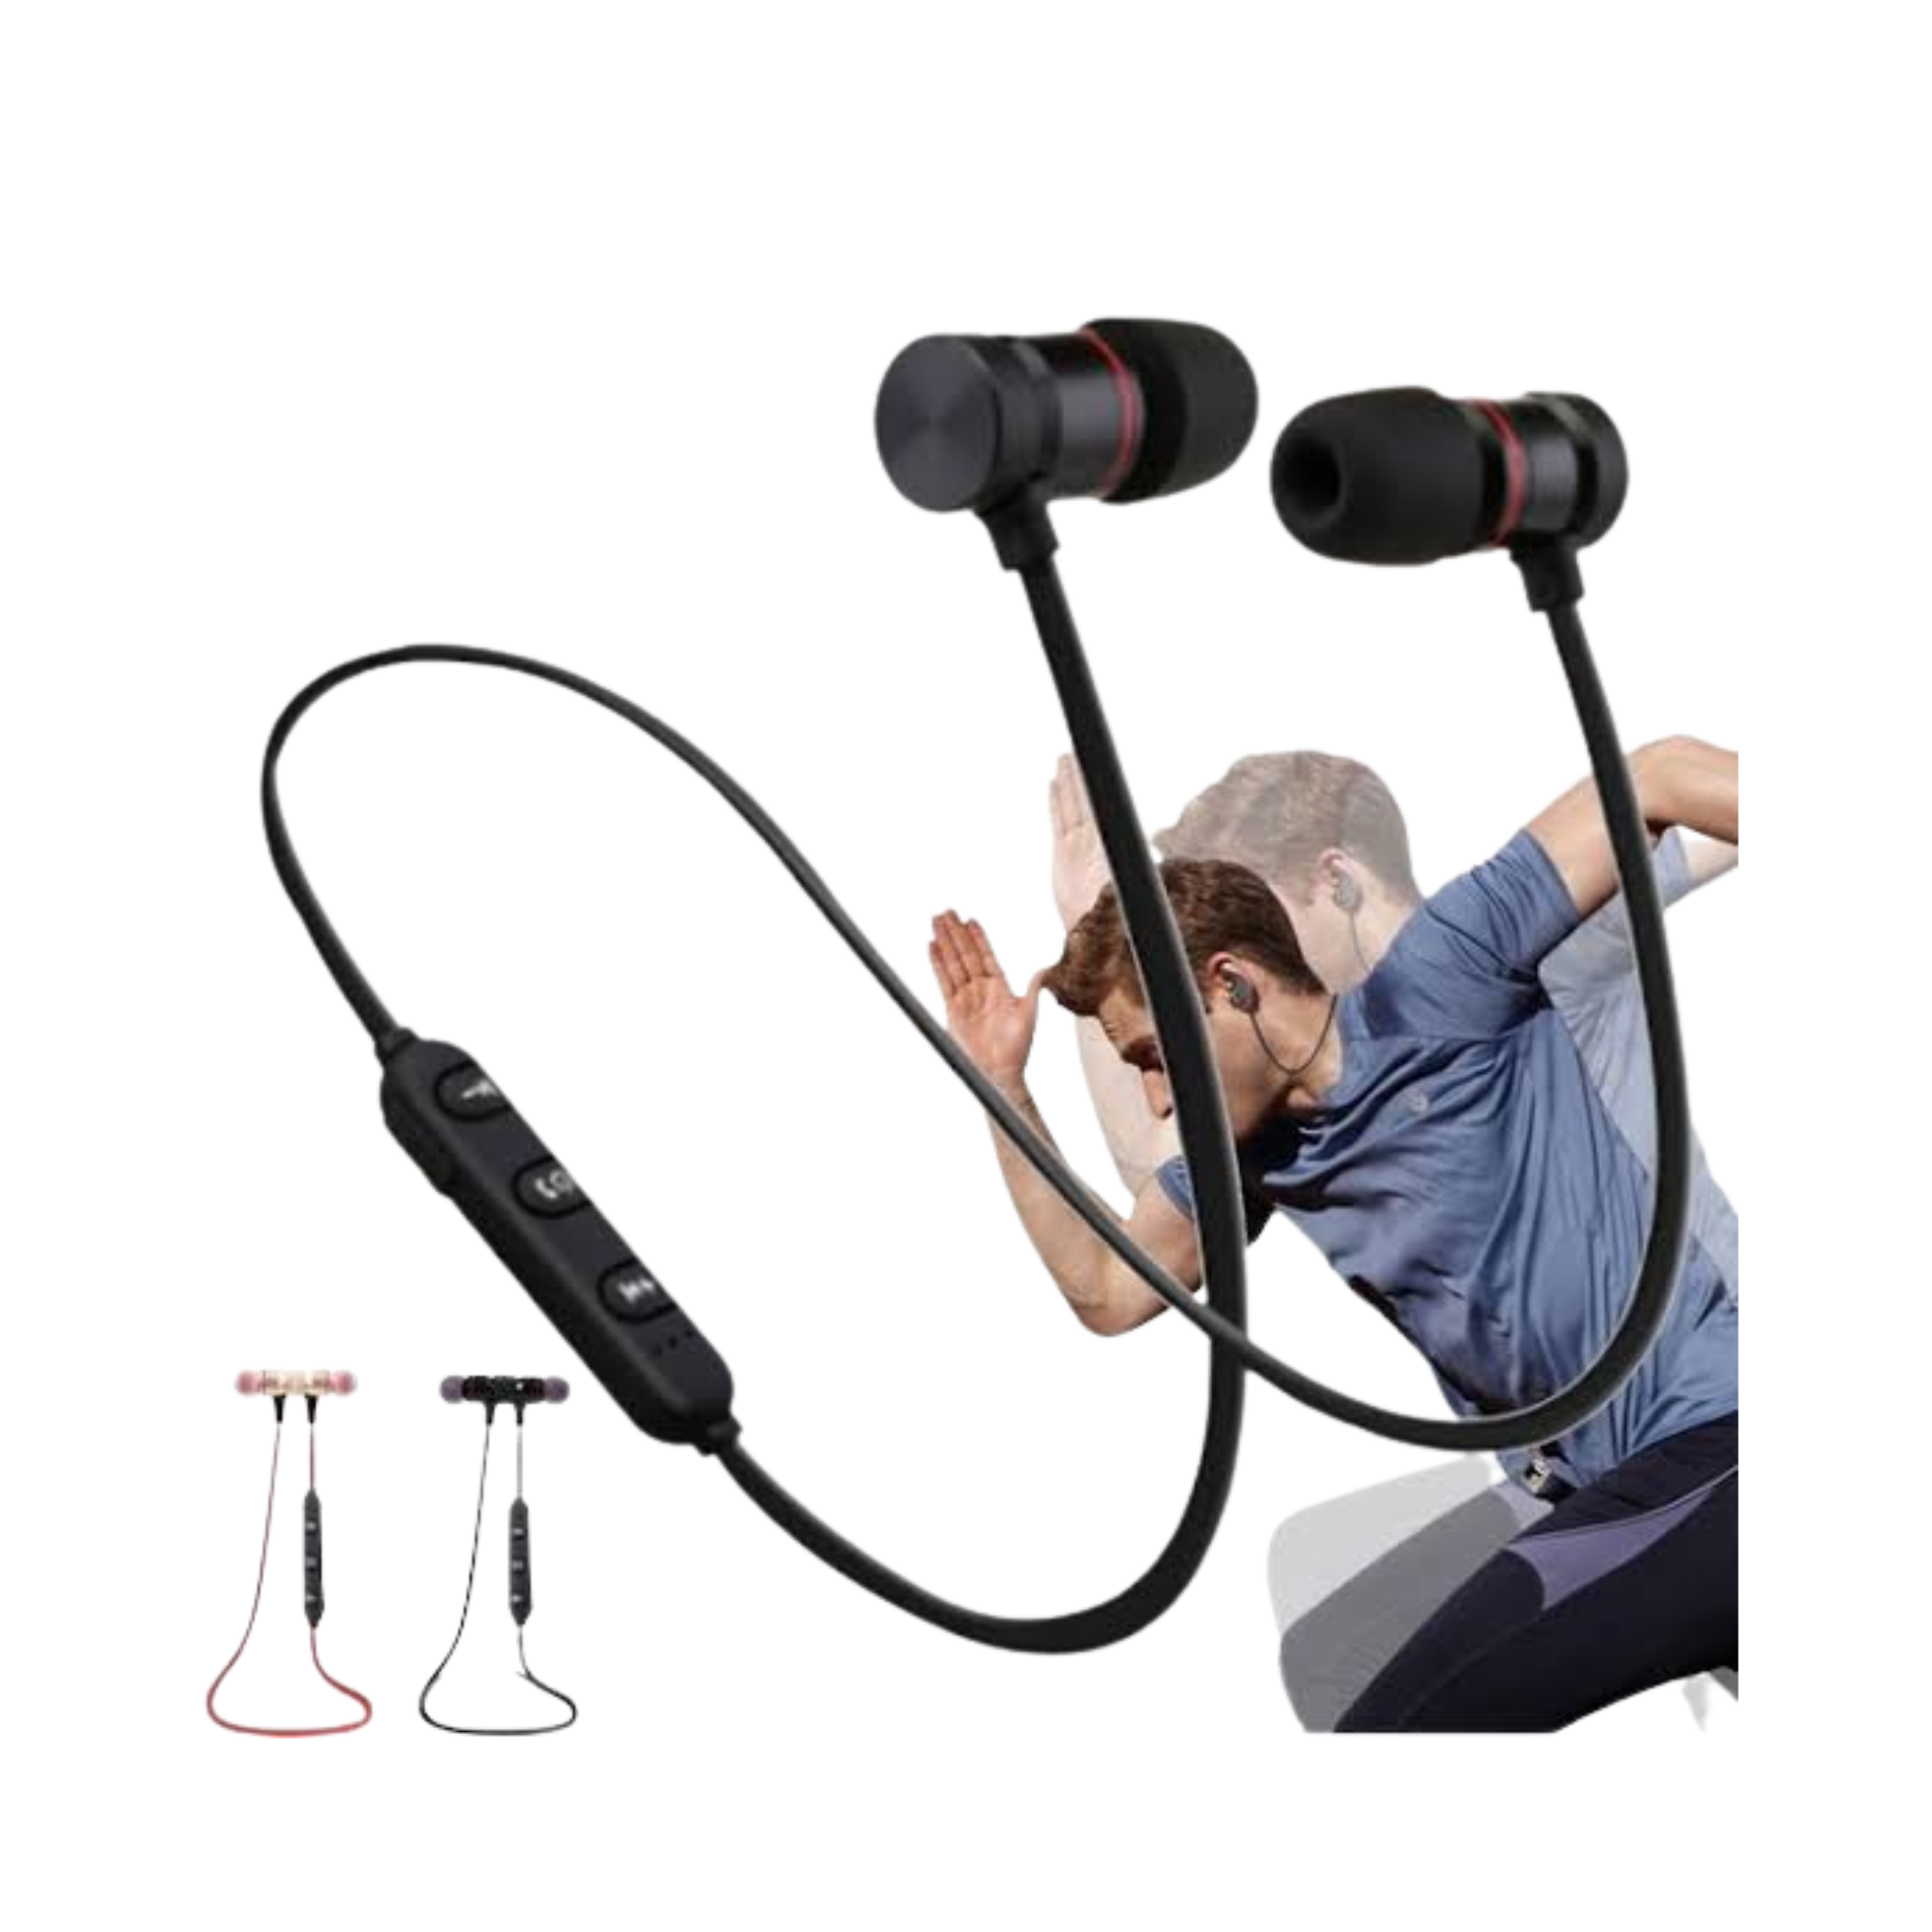 Over-The-Ear Headphone, Bluetooth, Connect with All Devices (Buy 1 Get 1 Free)